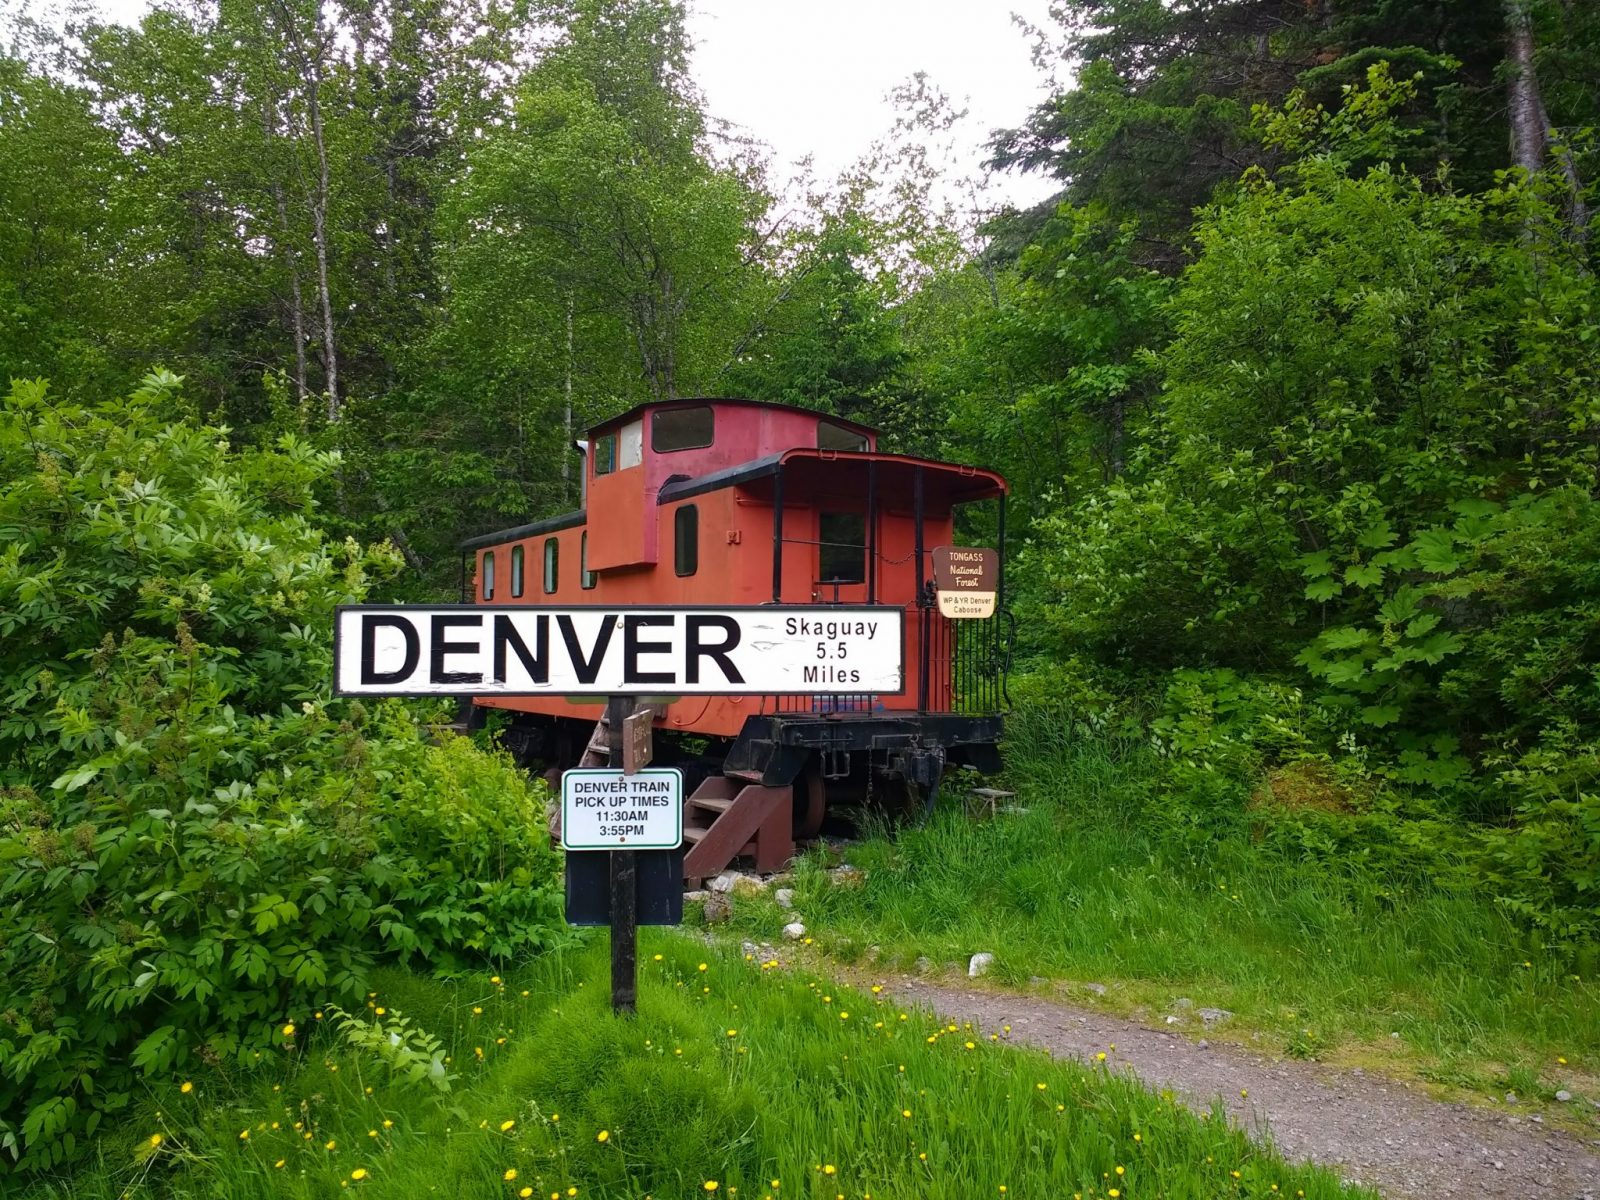 A red train caboose next to a trail. A railroad sign says "Denver" in the foreground. The sign and caboose are surrounded by green forest. For a unique camping experience in Alaska you can sleep in the caboose